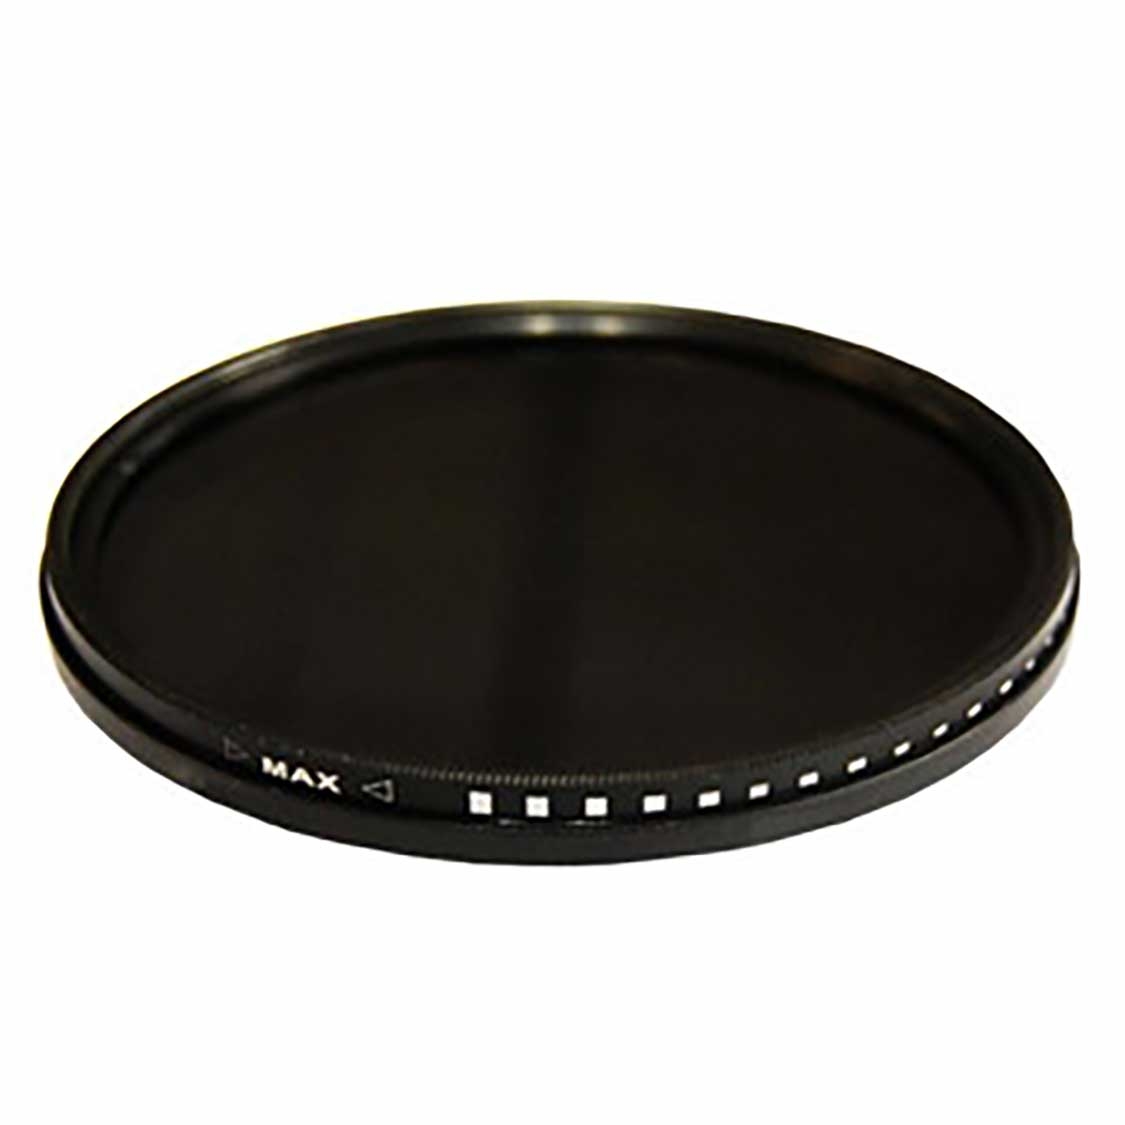 Promaster 67mm Variable ND Filter